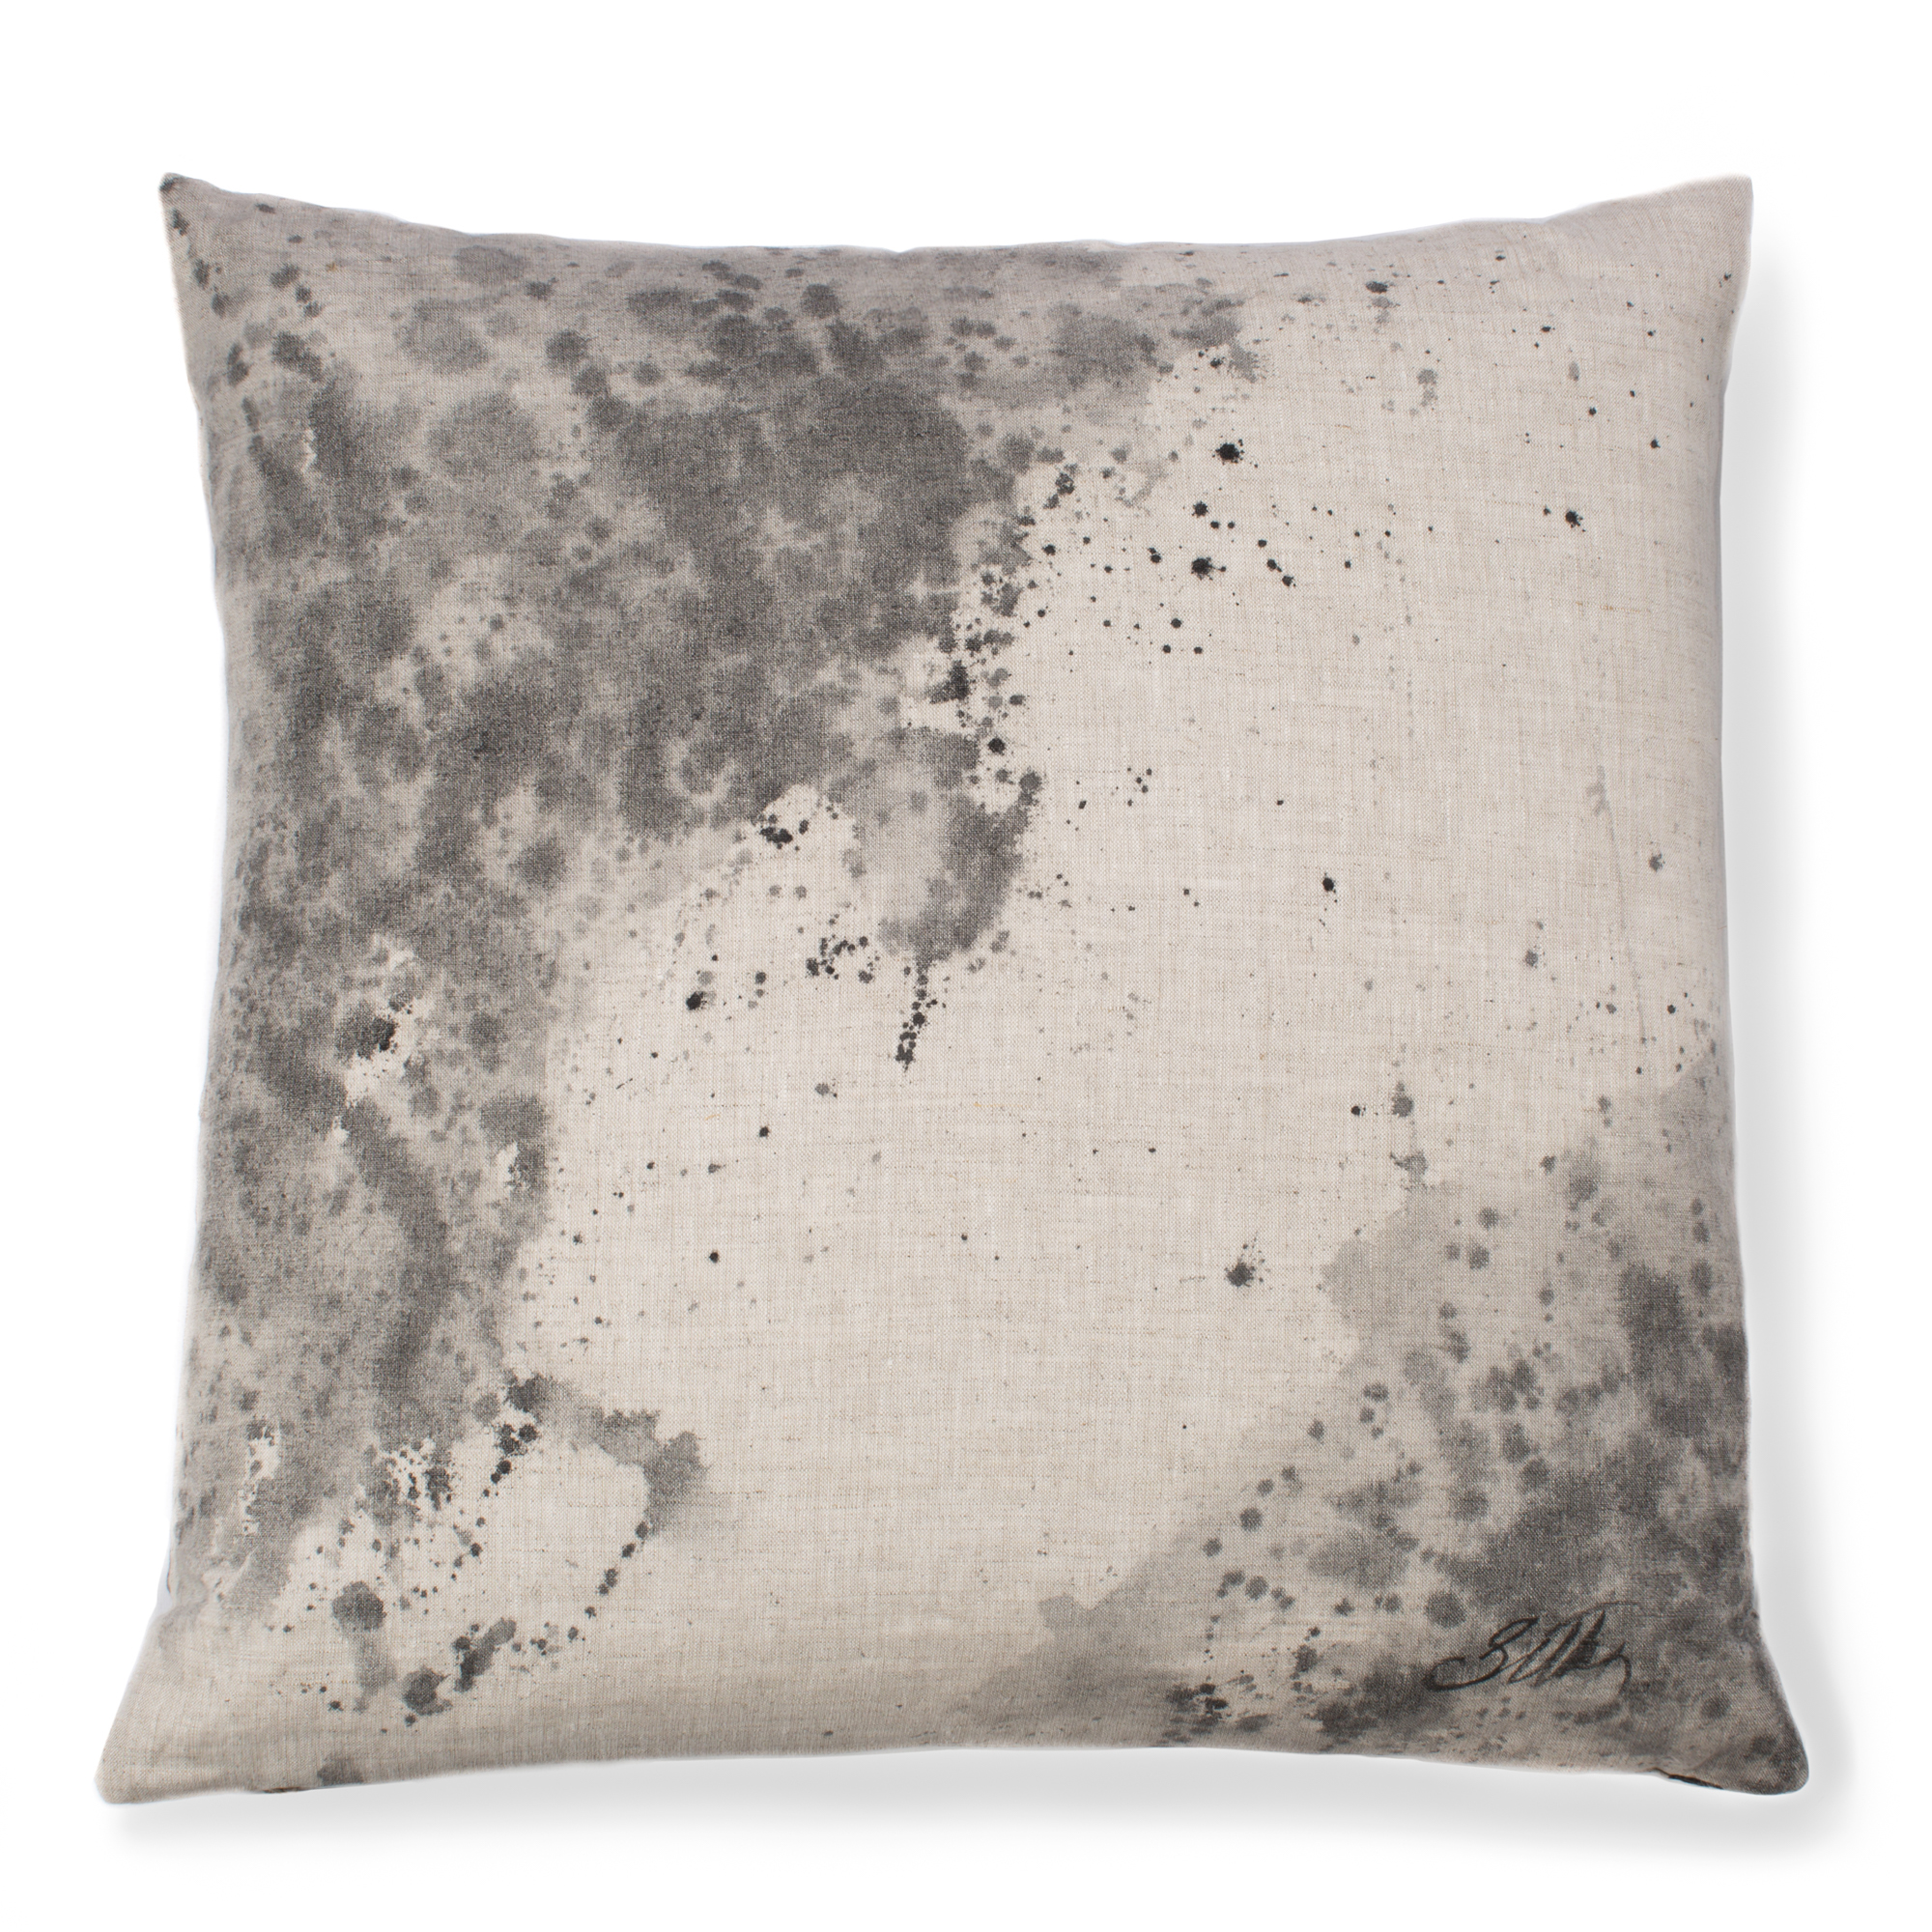 AbstractPillowFinished-4.jpg